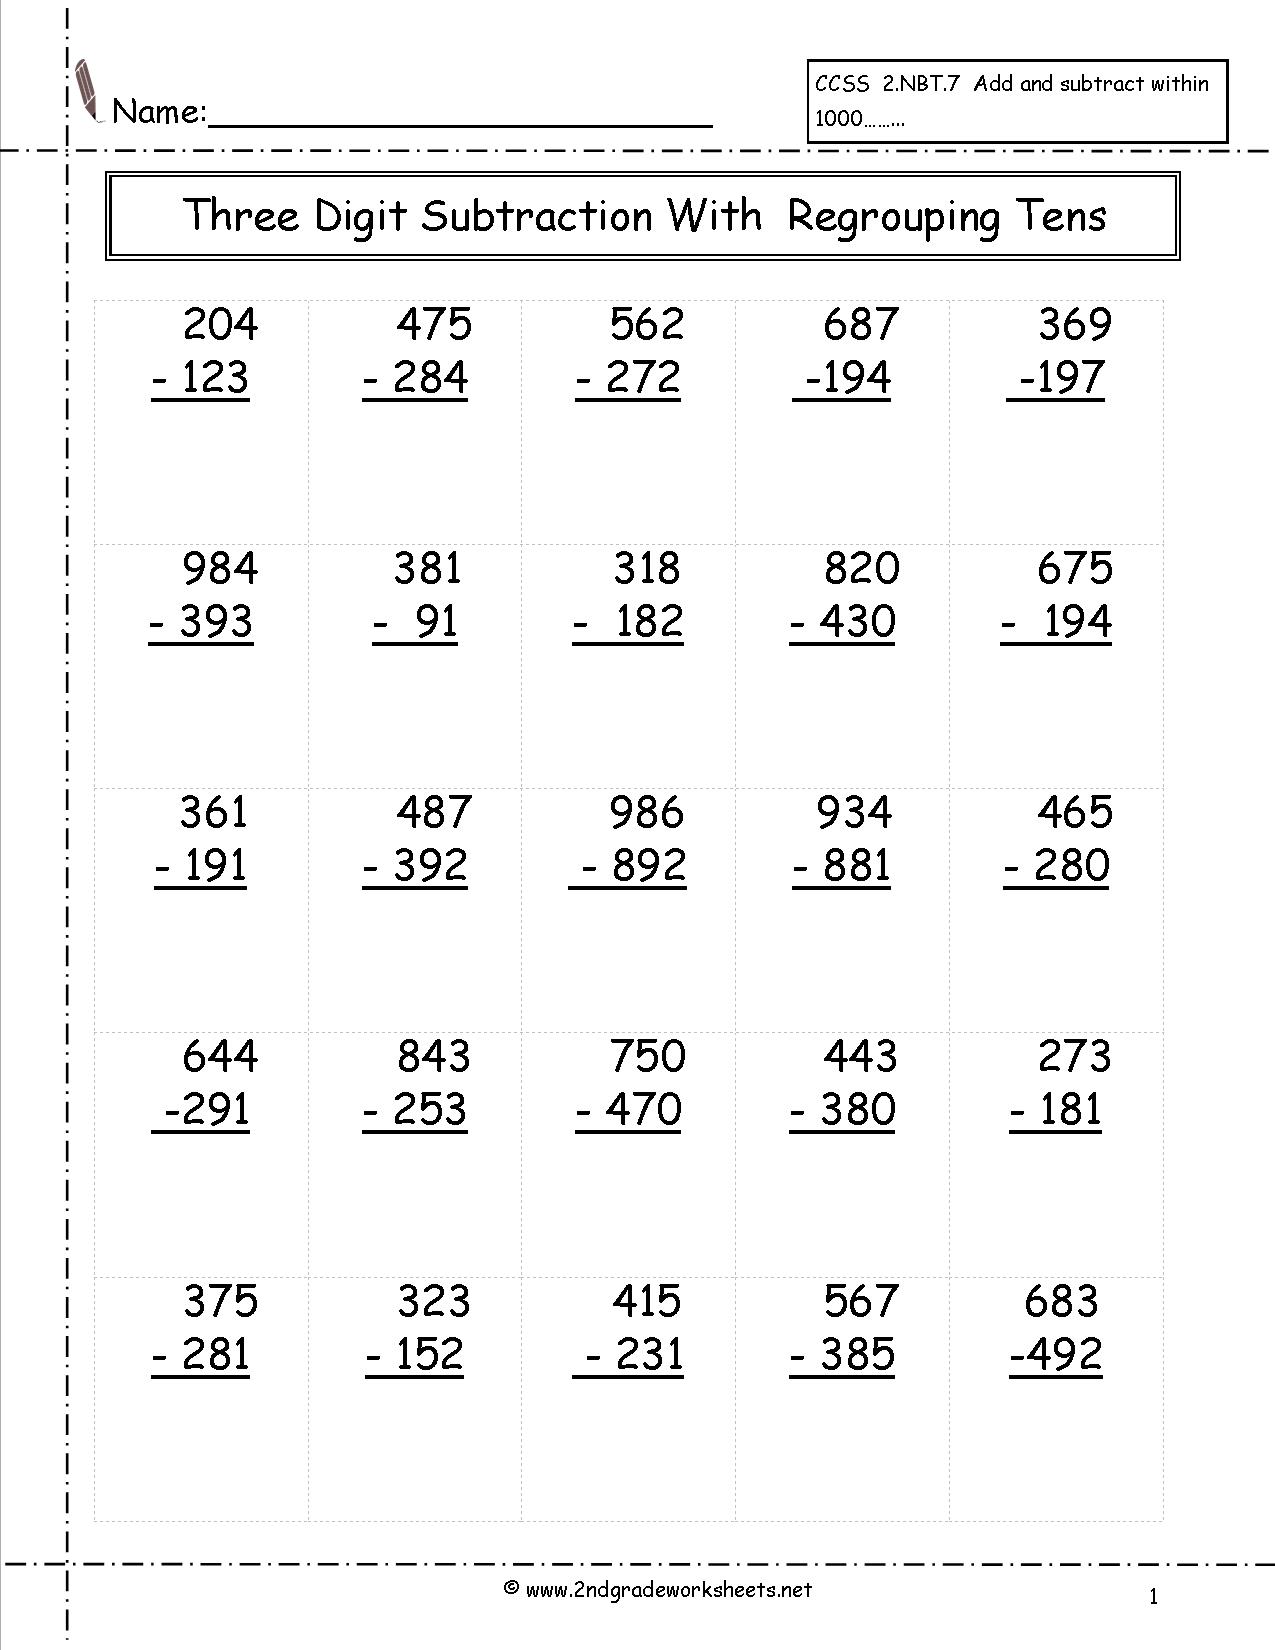 Collection Of Three Digit Subtraction With Regrouping Worksheets